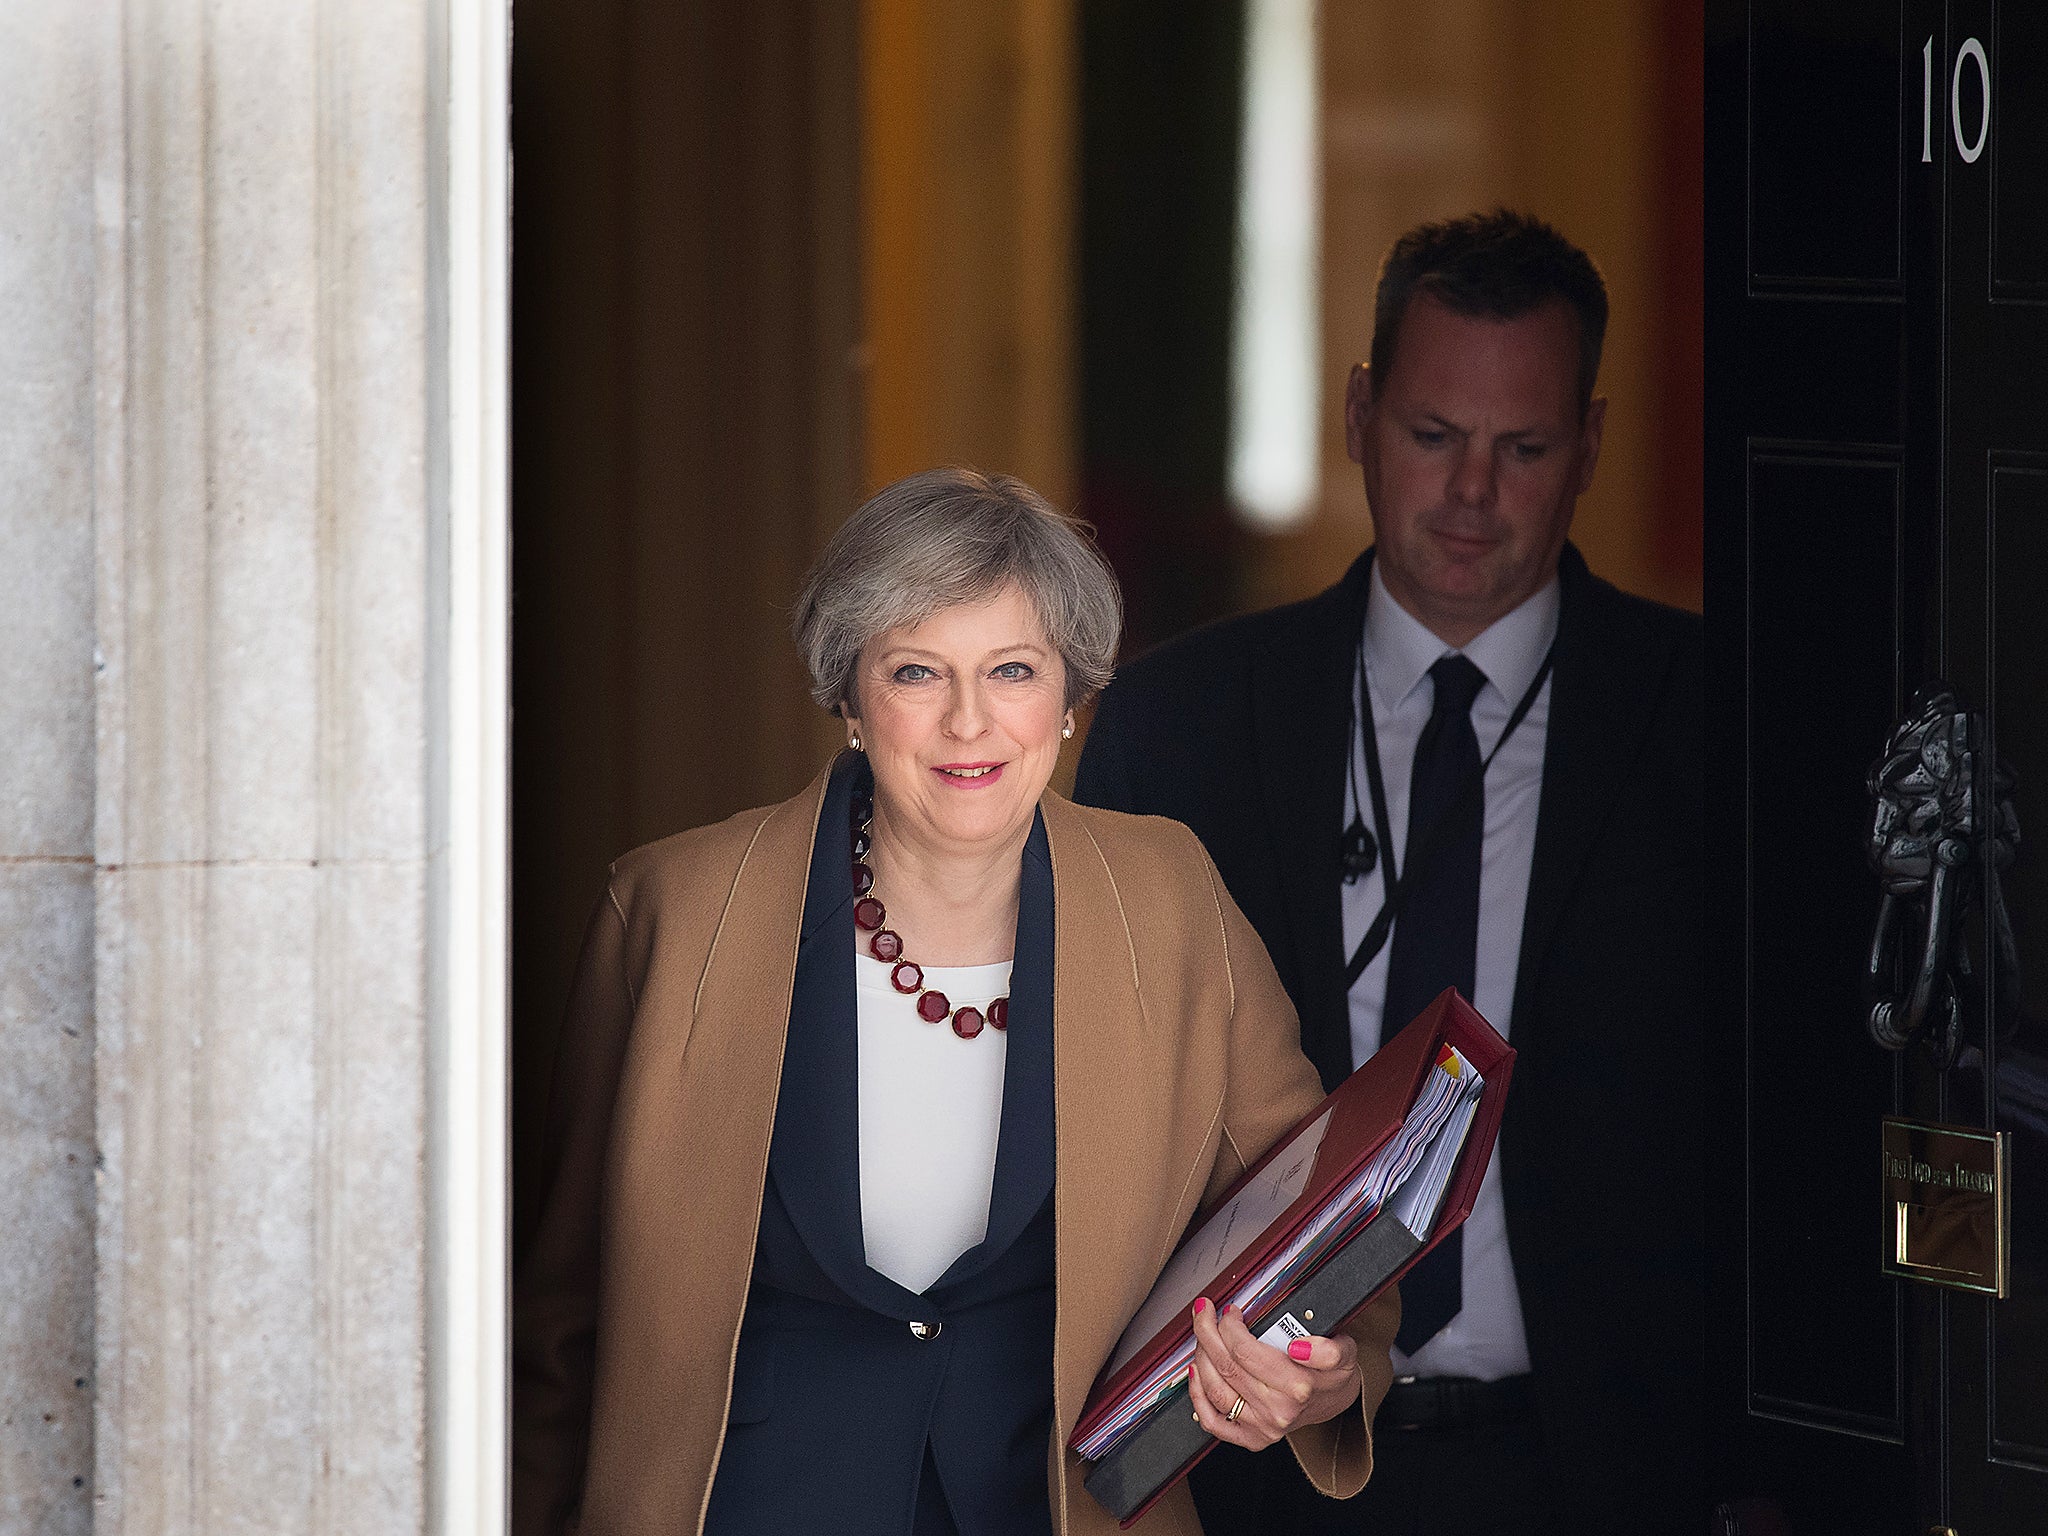 'Theresa May has continued to bang the Brexit drum and paint her opposition as saboteurs'